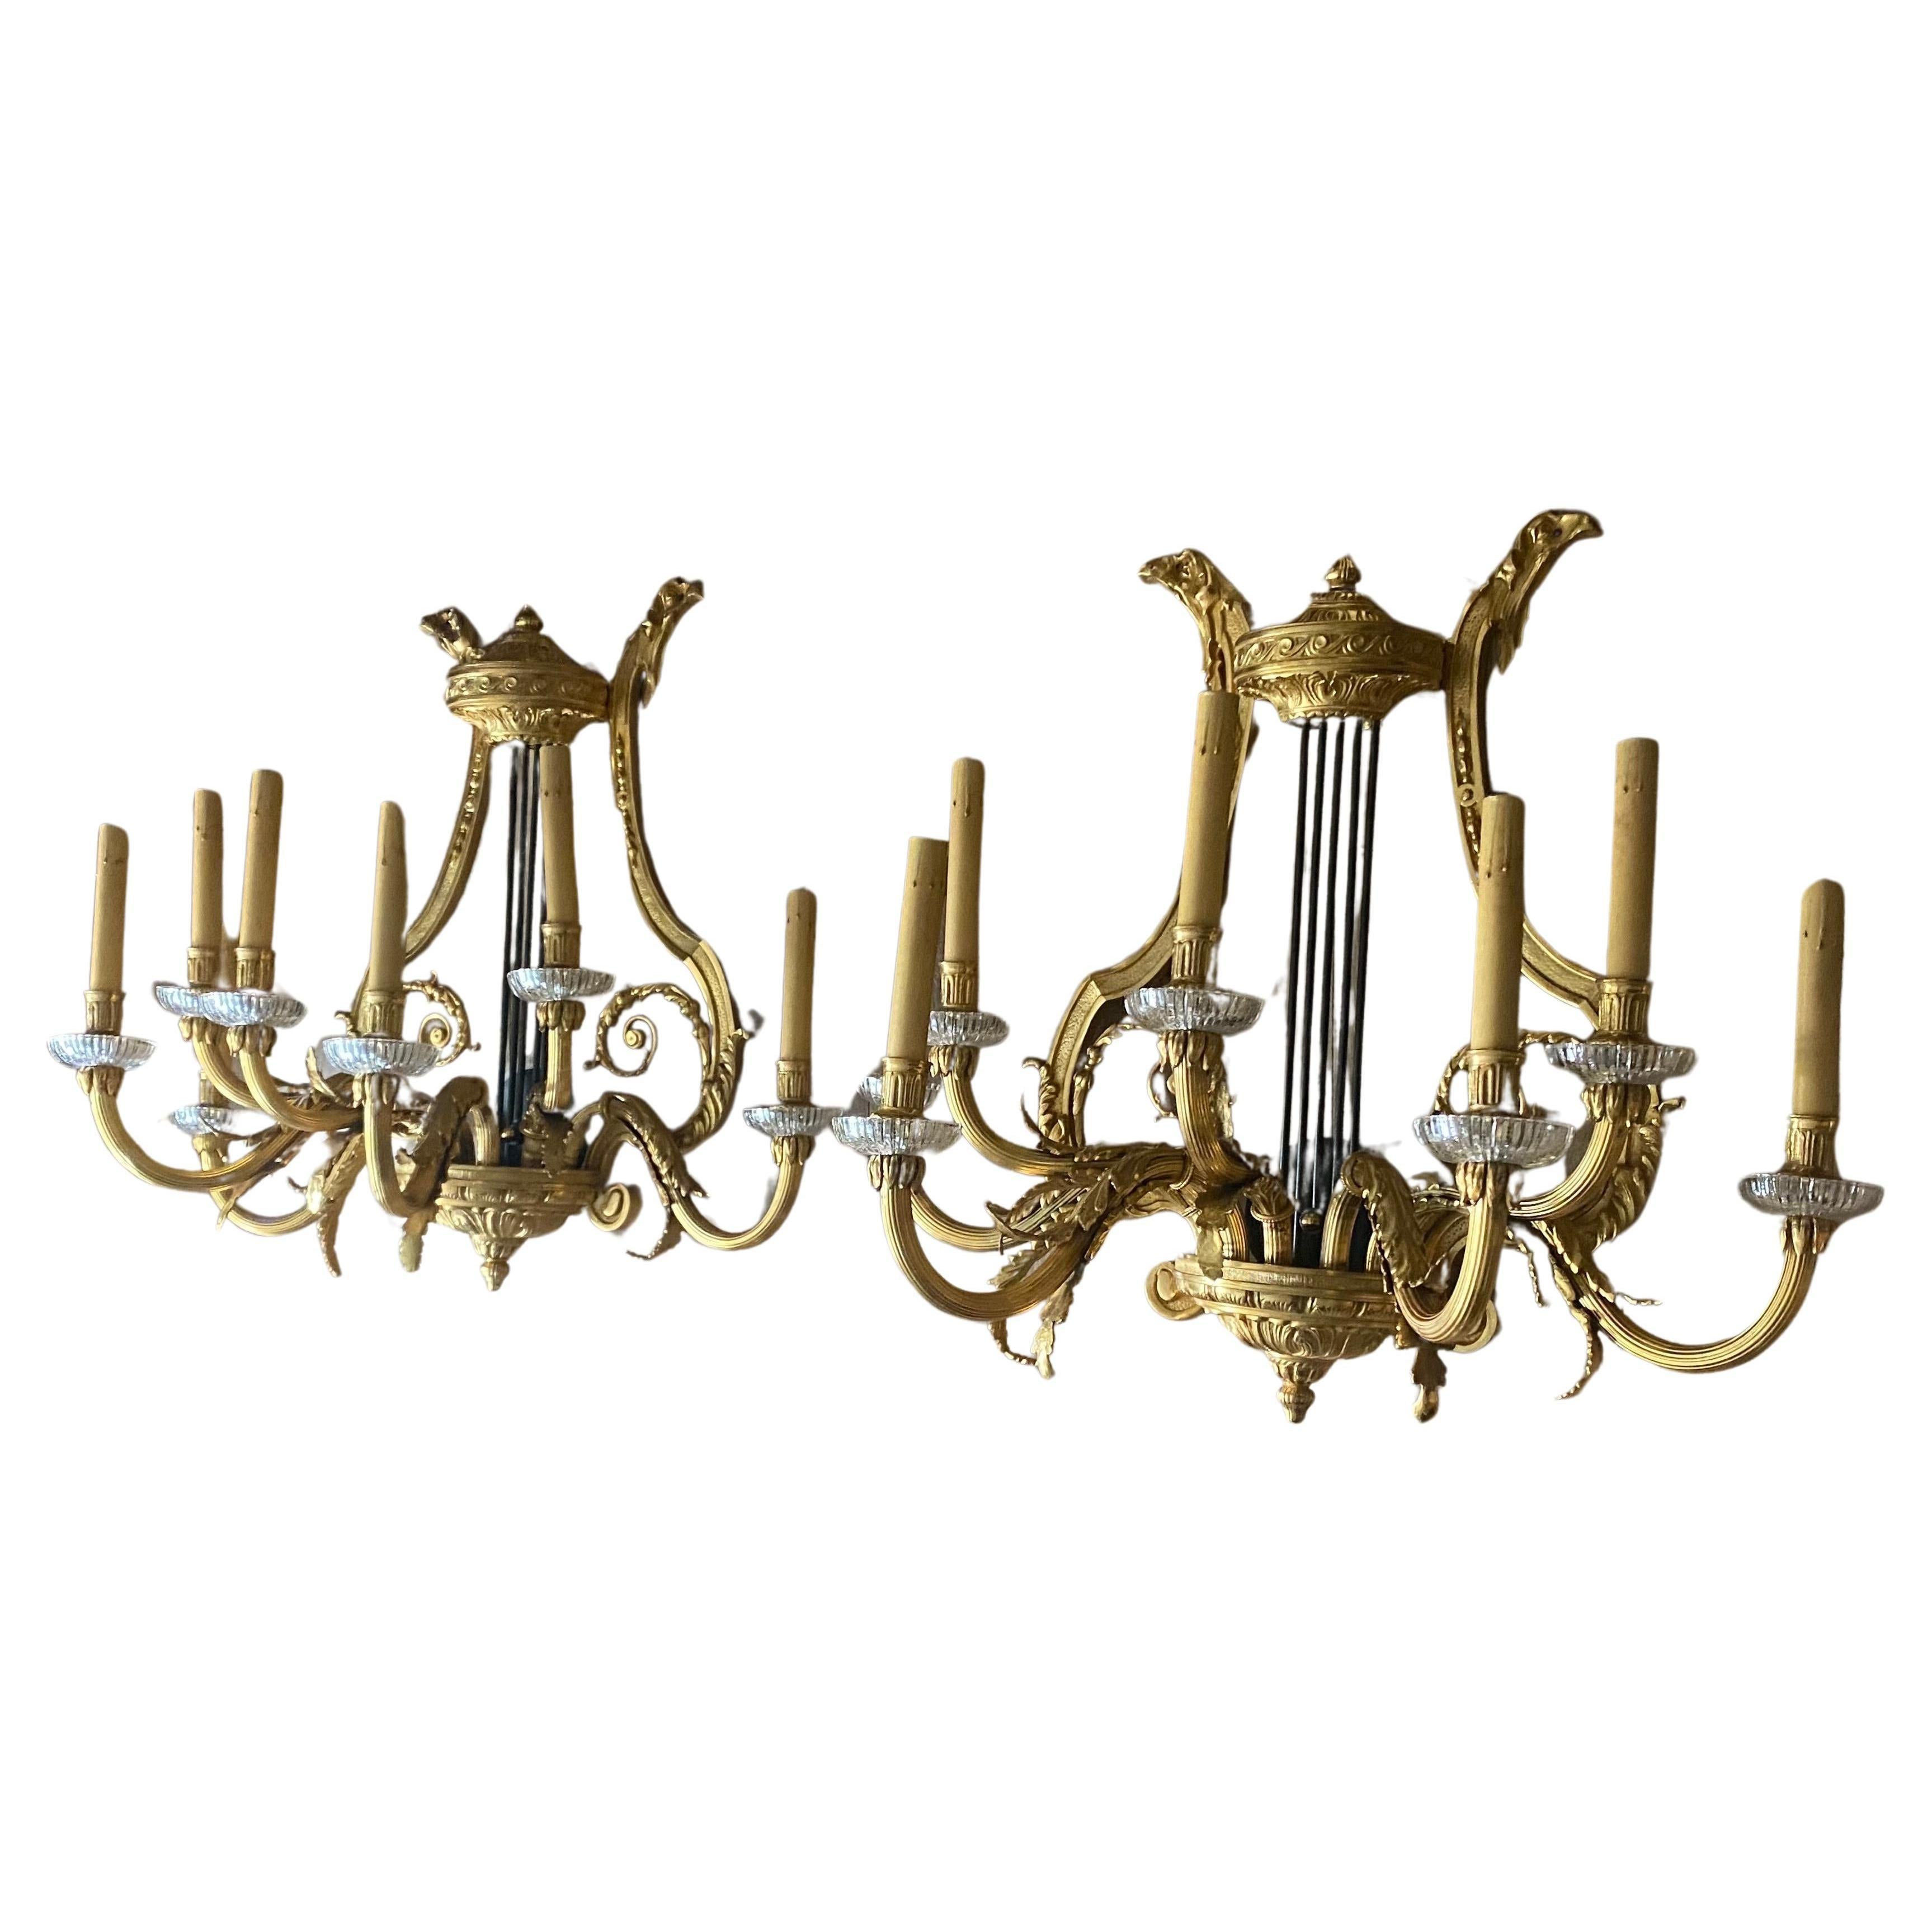 Huge Pair of 19th Century French Gilt Bronze Dore Wall Sconces In Excellent Condition For Sale In London, GB